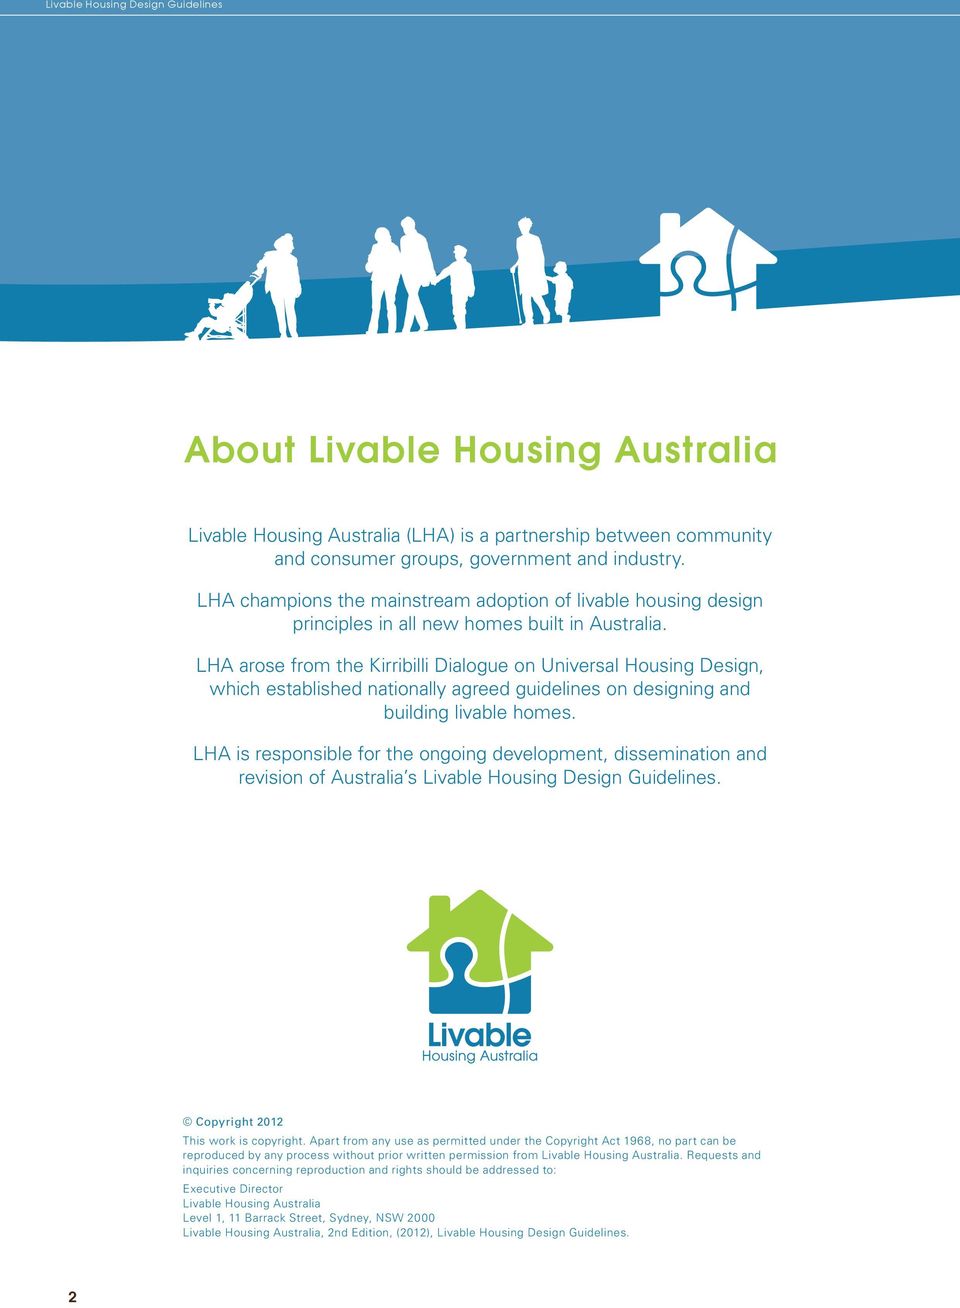 LHA arose from the Kirribilli Dialogue on Universal Housing Design, which established nationally agreed guidelines on designing and building livable homes.